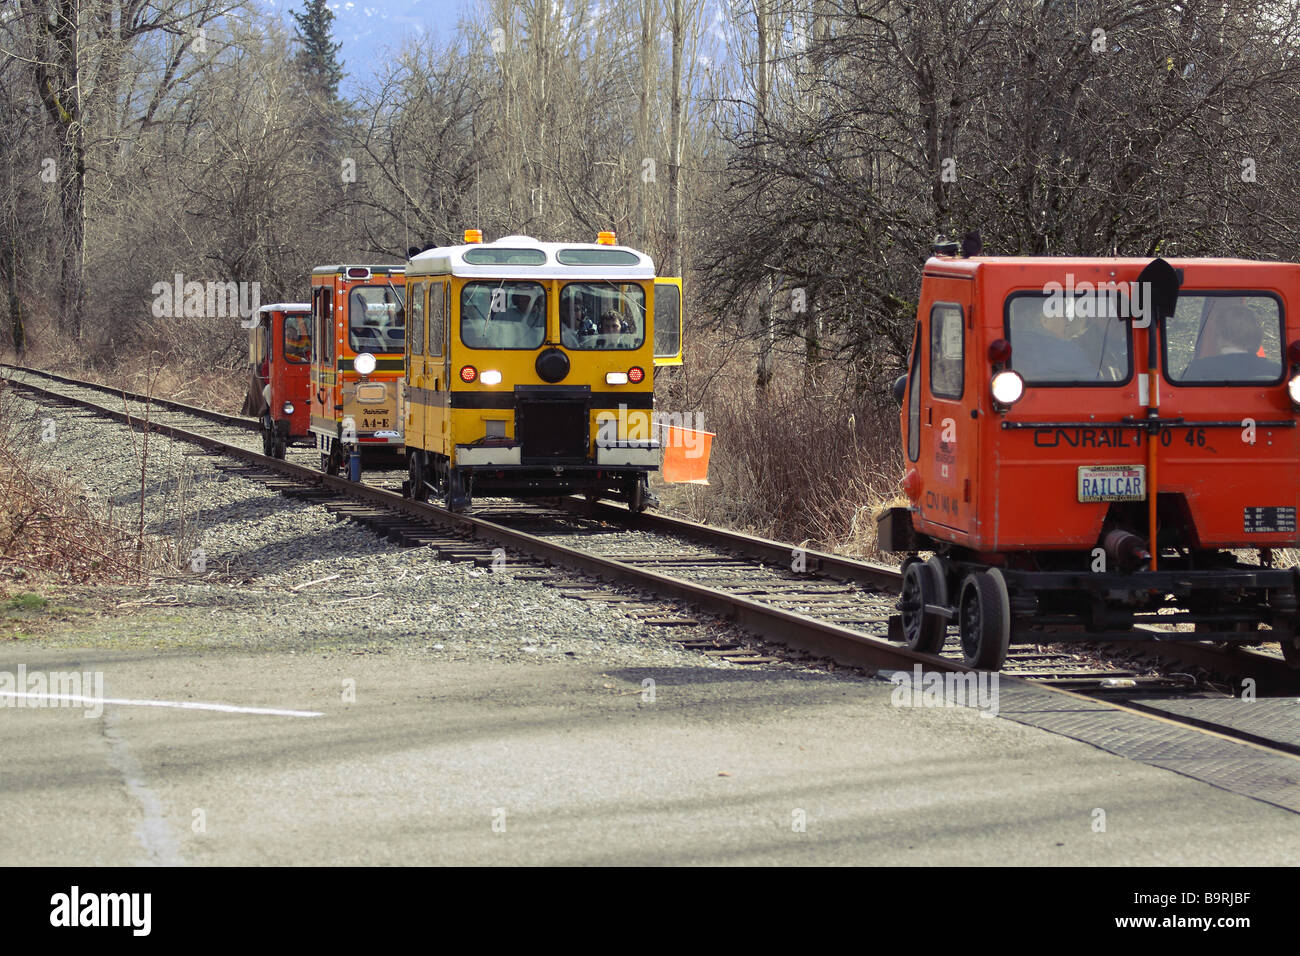 A group of different railcars driving down the railroad tracks in the Snoqualmie Valley preparing for a railroad crossing. Stock Photo